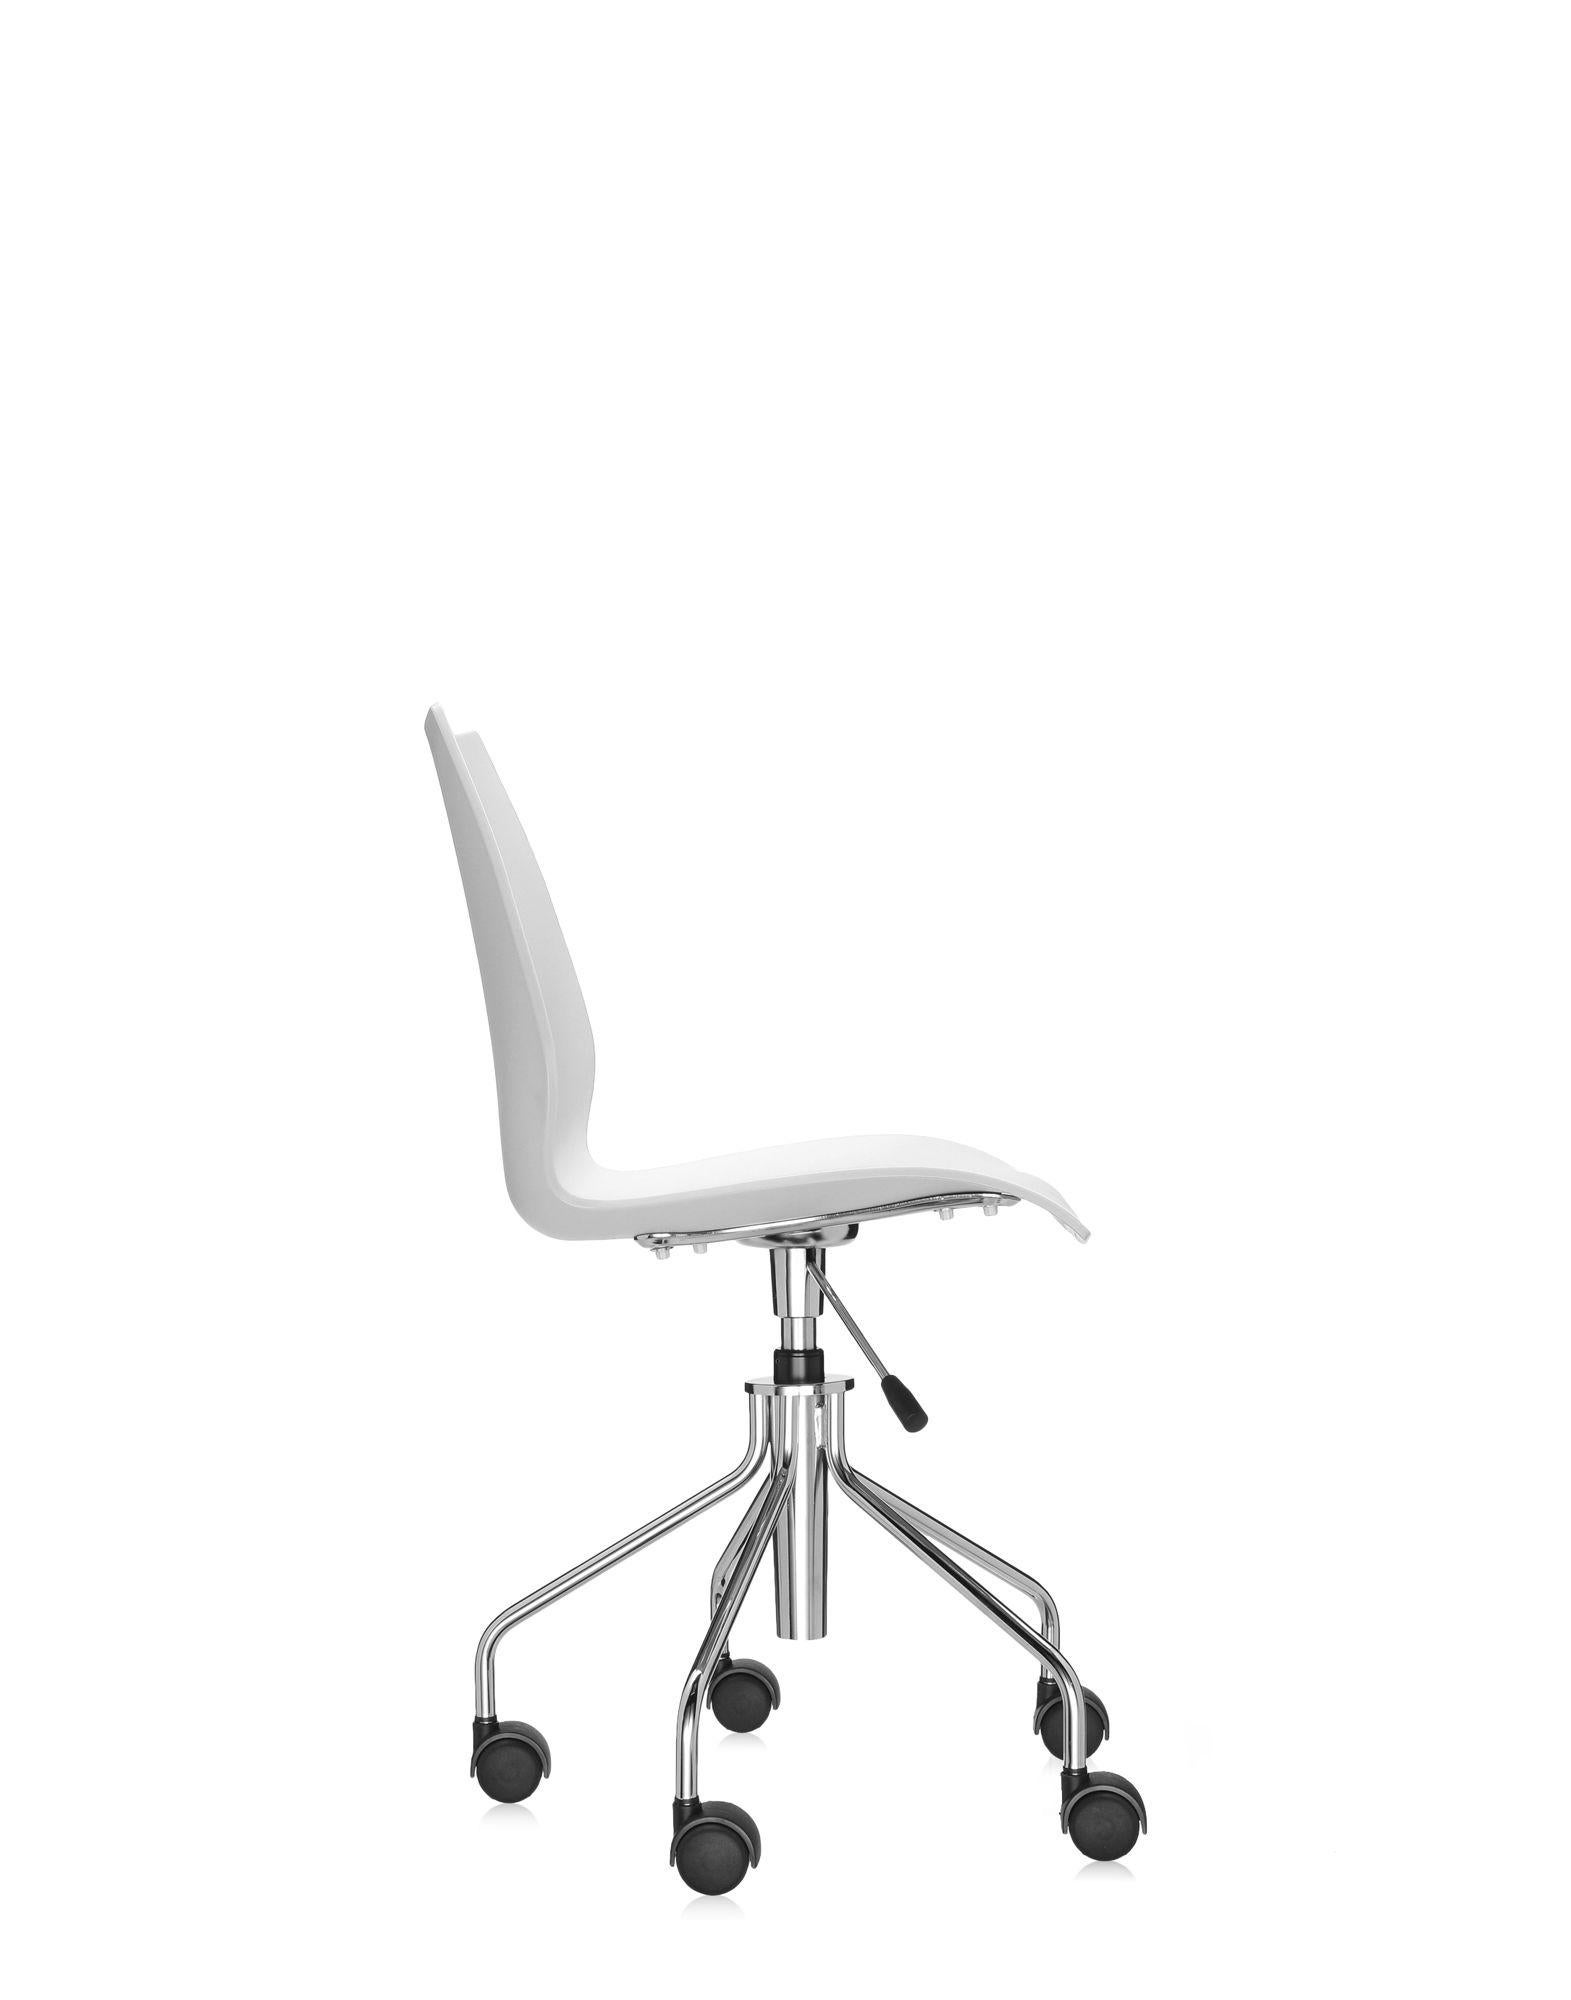 Contemporary Kartell Maui Swivel Chair Adjustable in Zinc White by Vico Magistretti